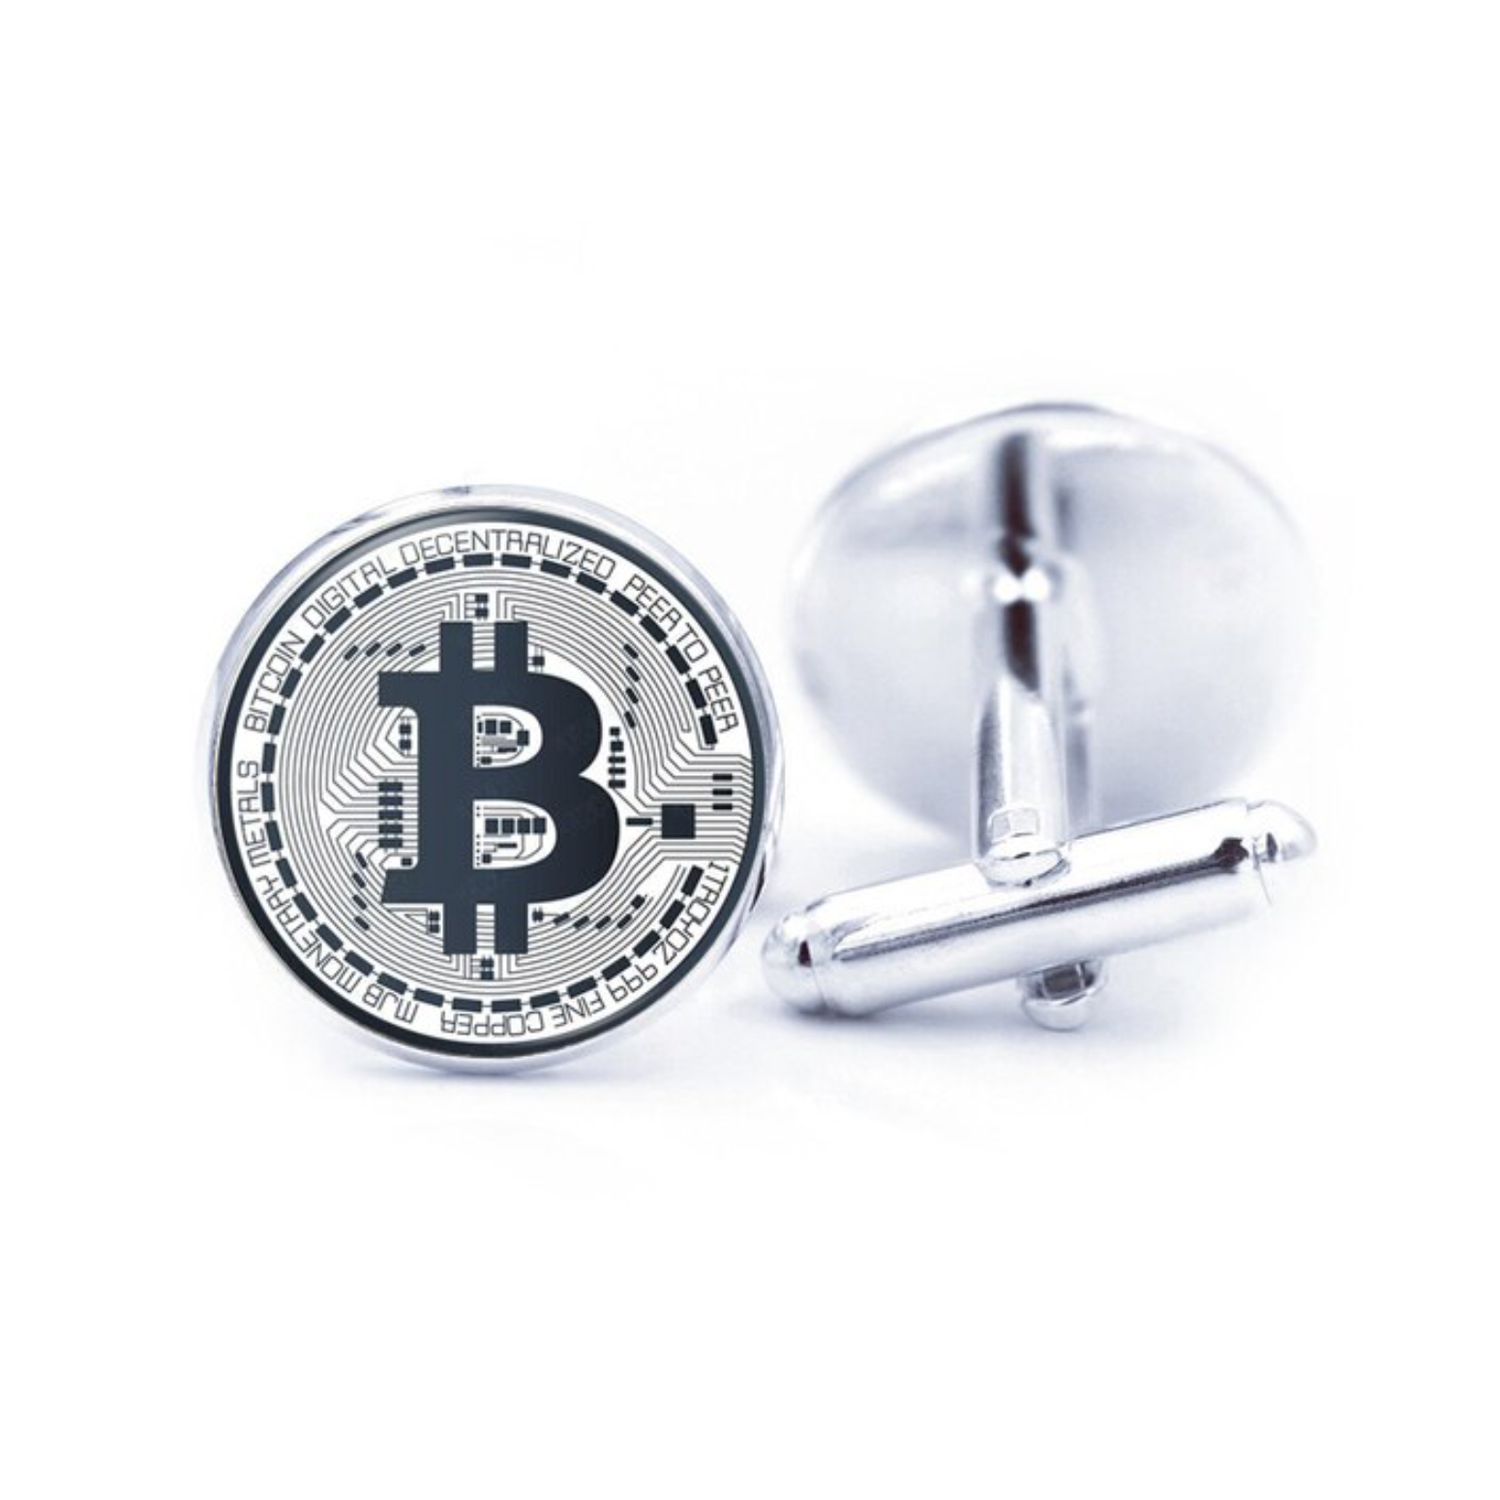 Chrome and Silver Colored Bitcoin Cufflinks